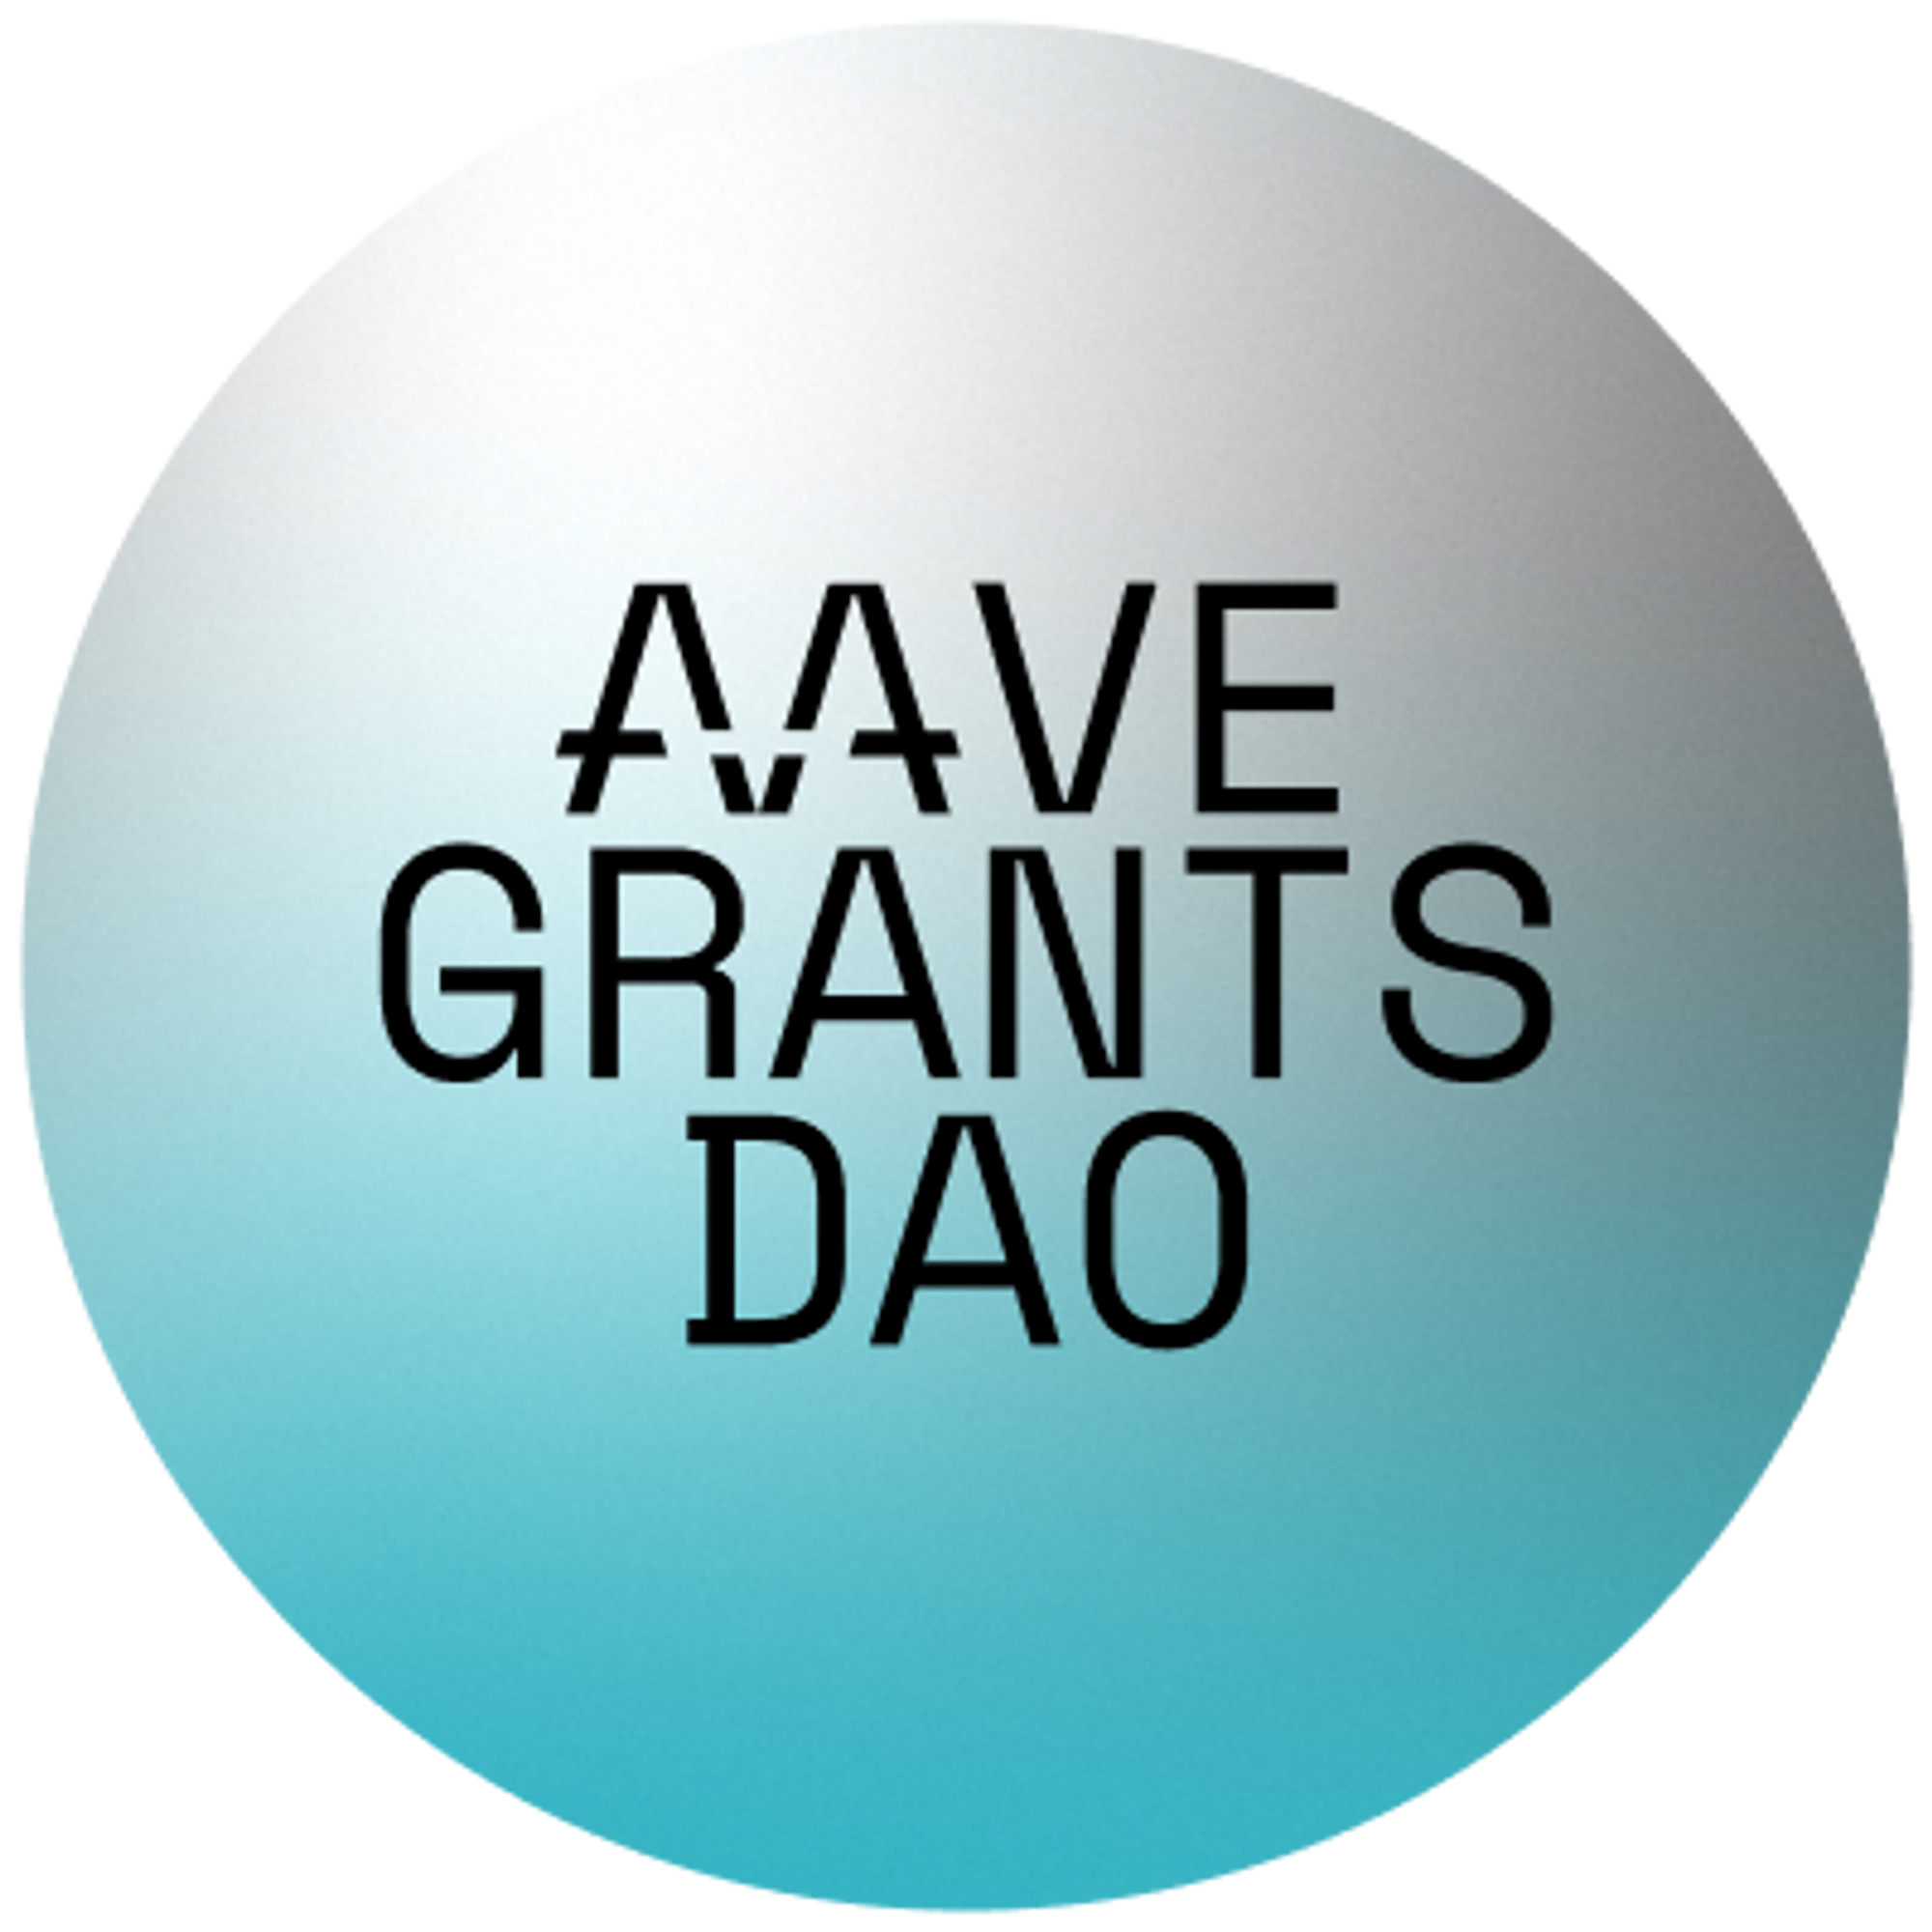 Aave Grants DAO logo